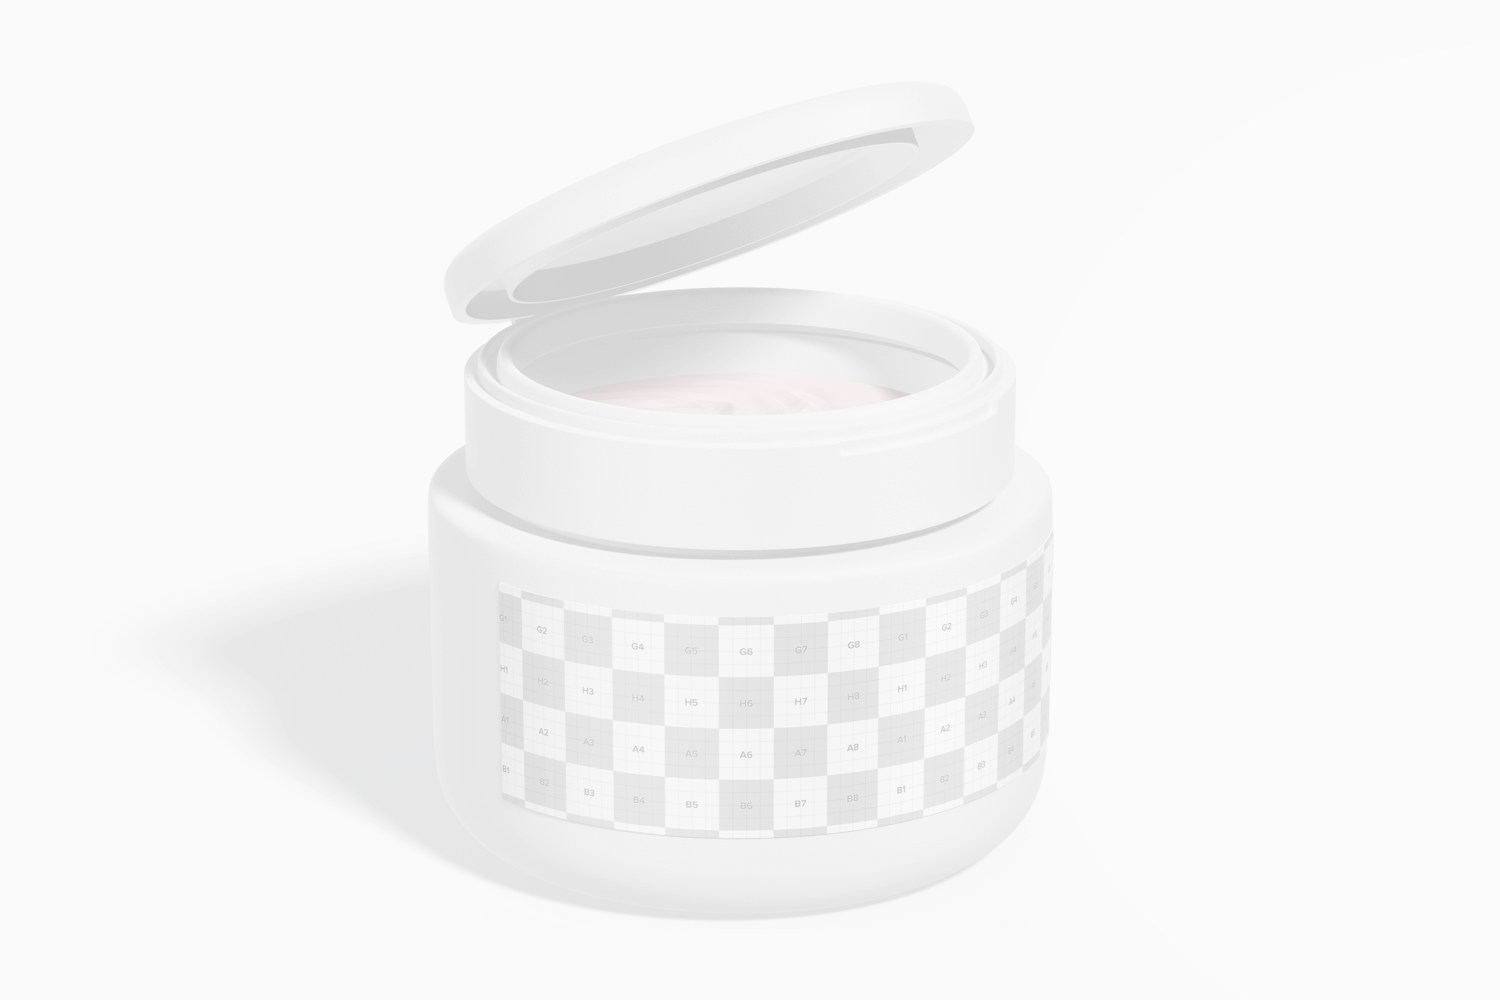 Small Jar of Hair Cream Mockup, Perspective View